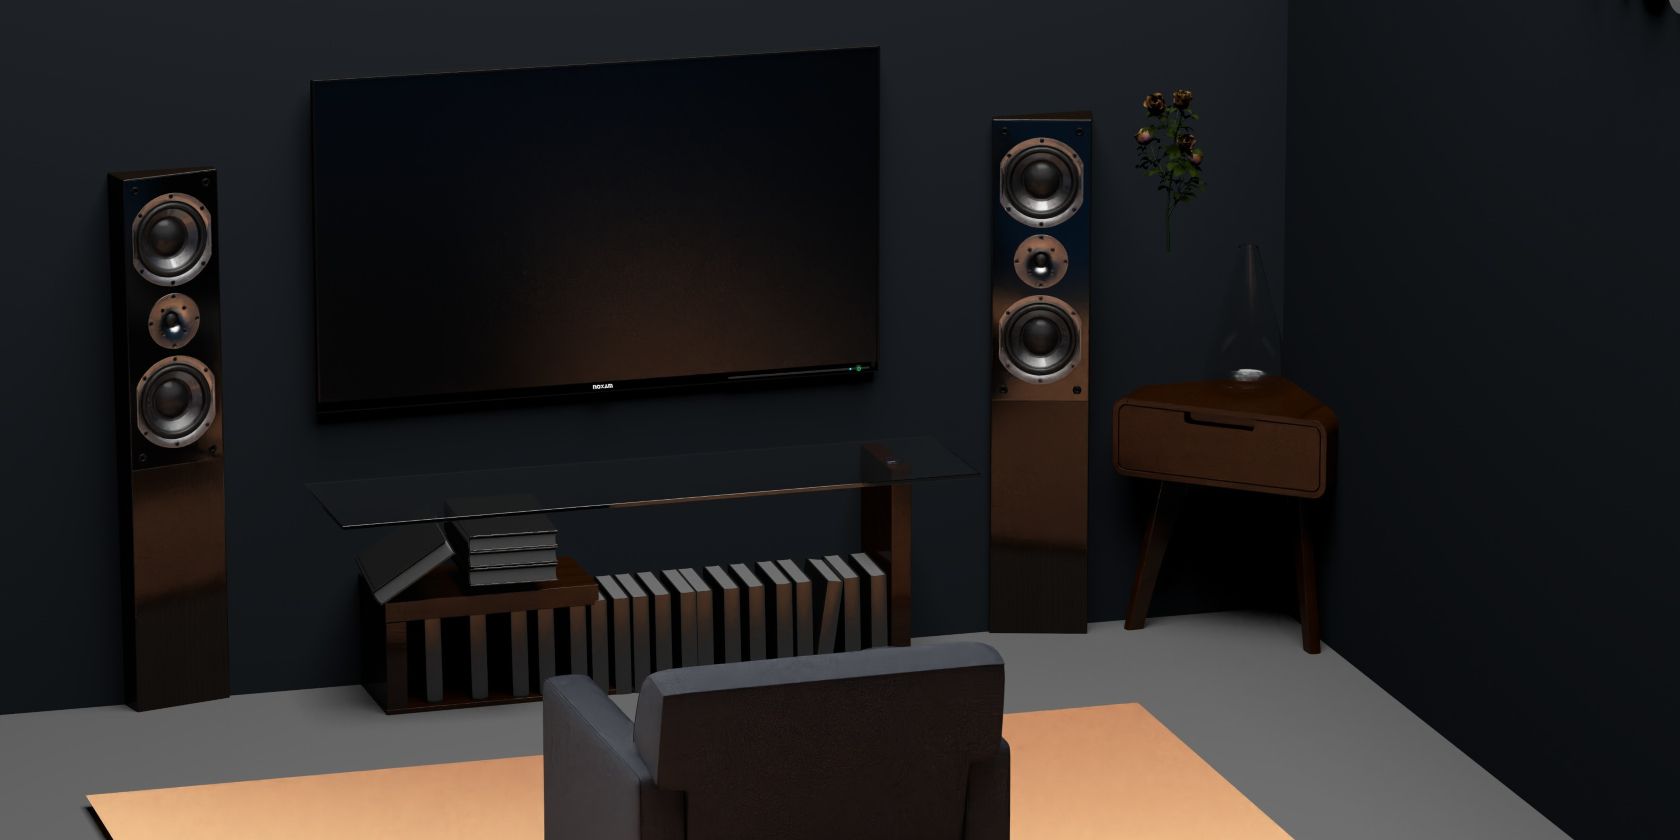 A Living room with a flat screen TV and speakers